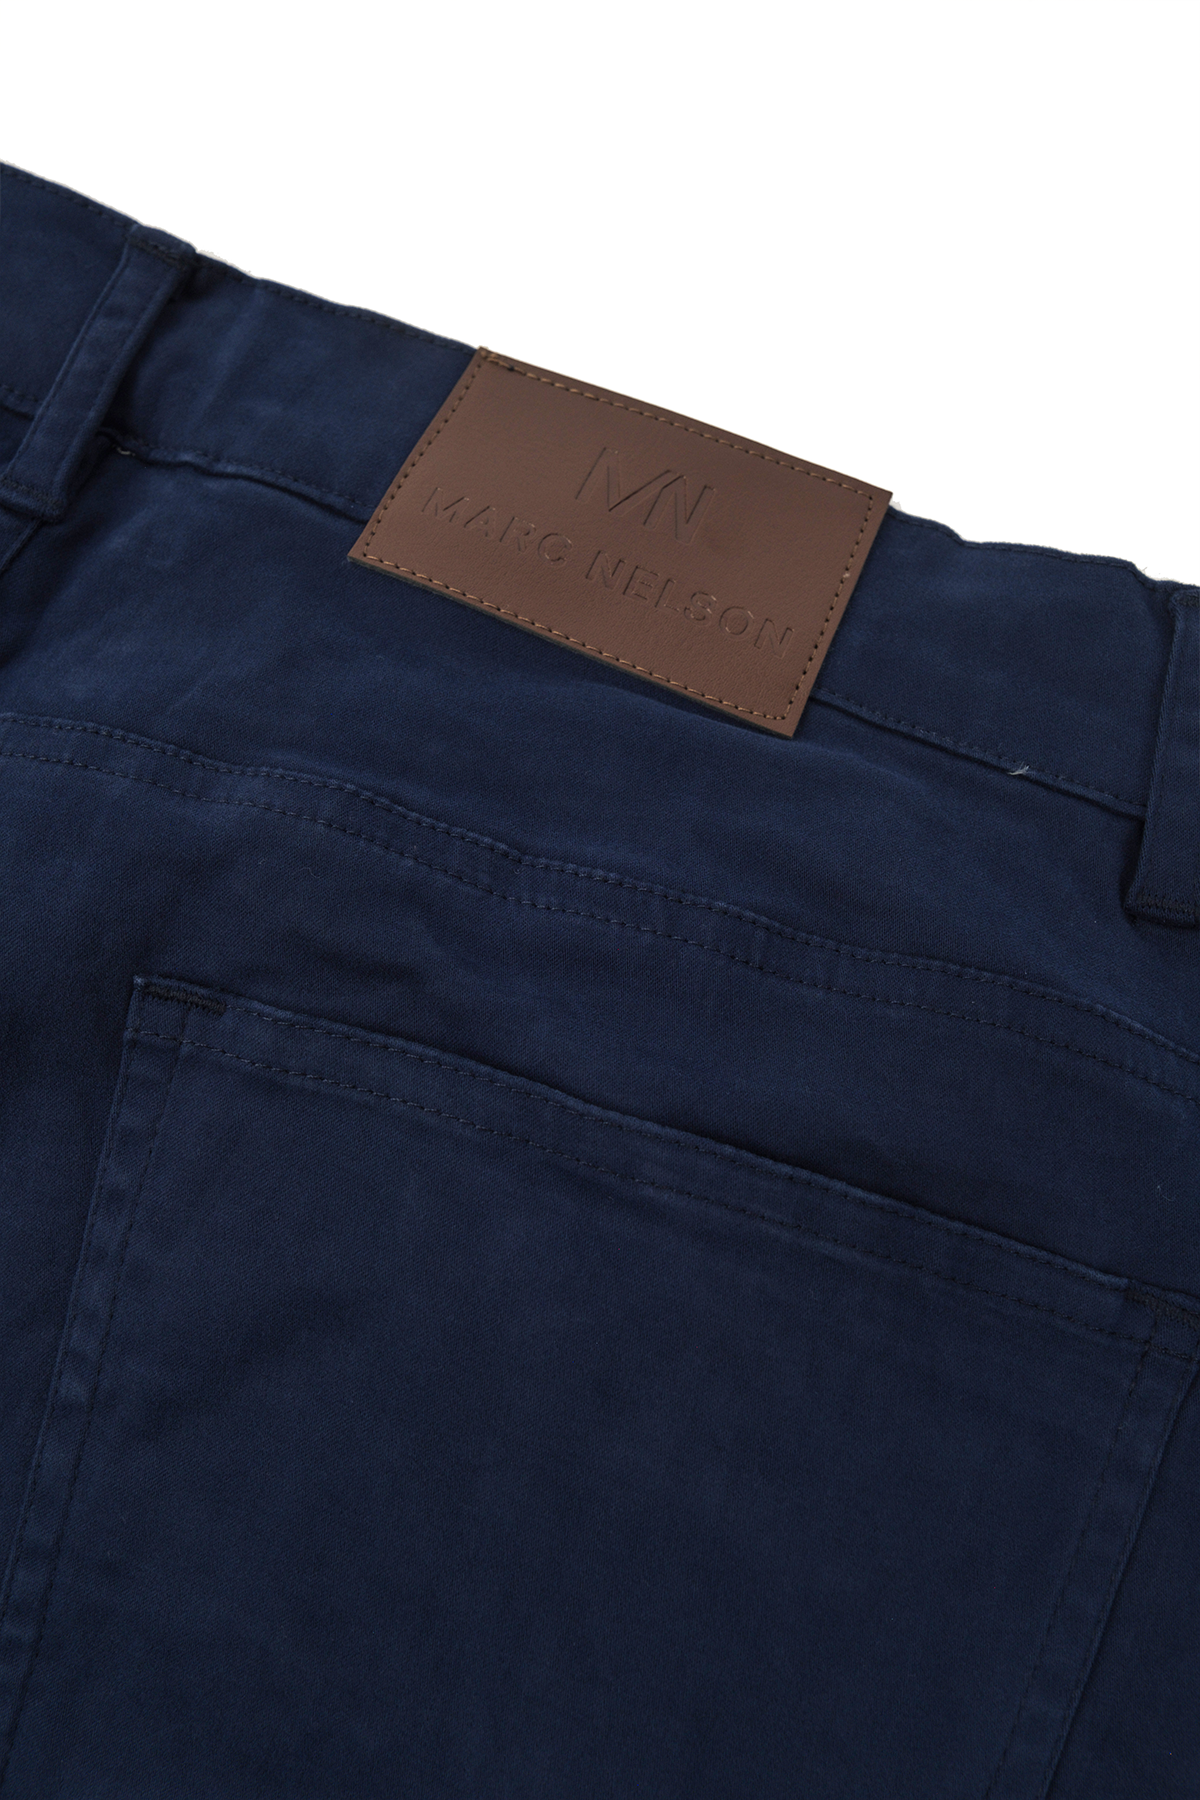 Close up photo of the backside of the George Navy Pants focusing on the details of the leather tab and the back pocket. 